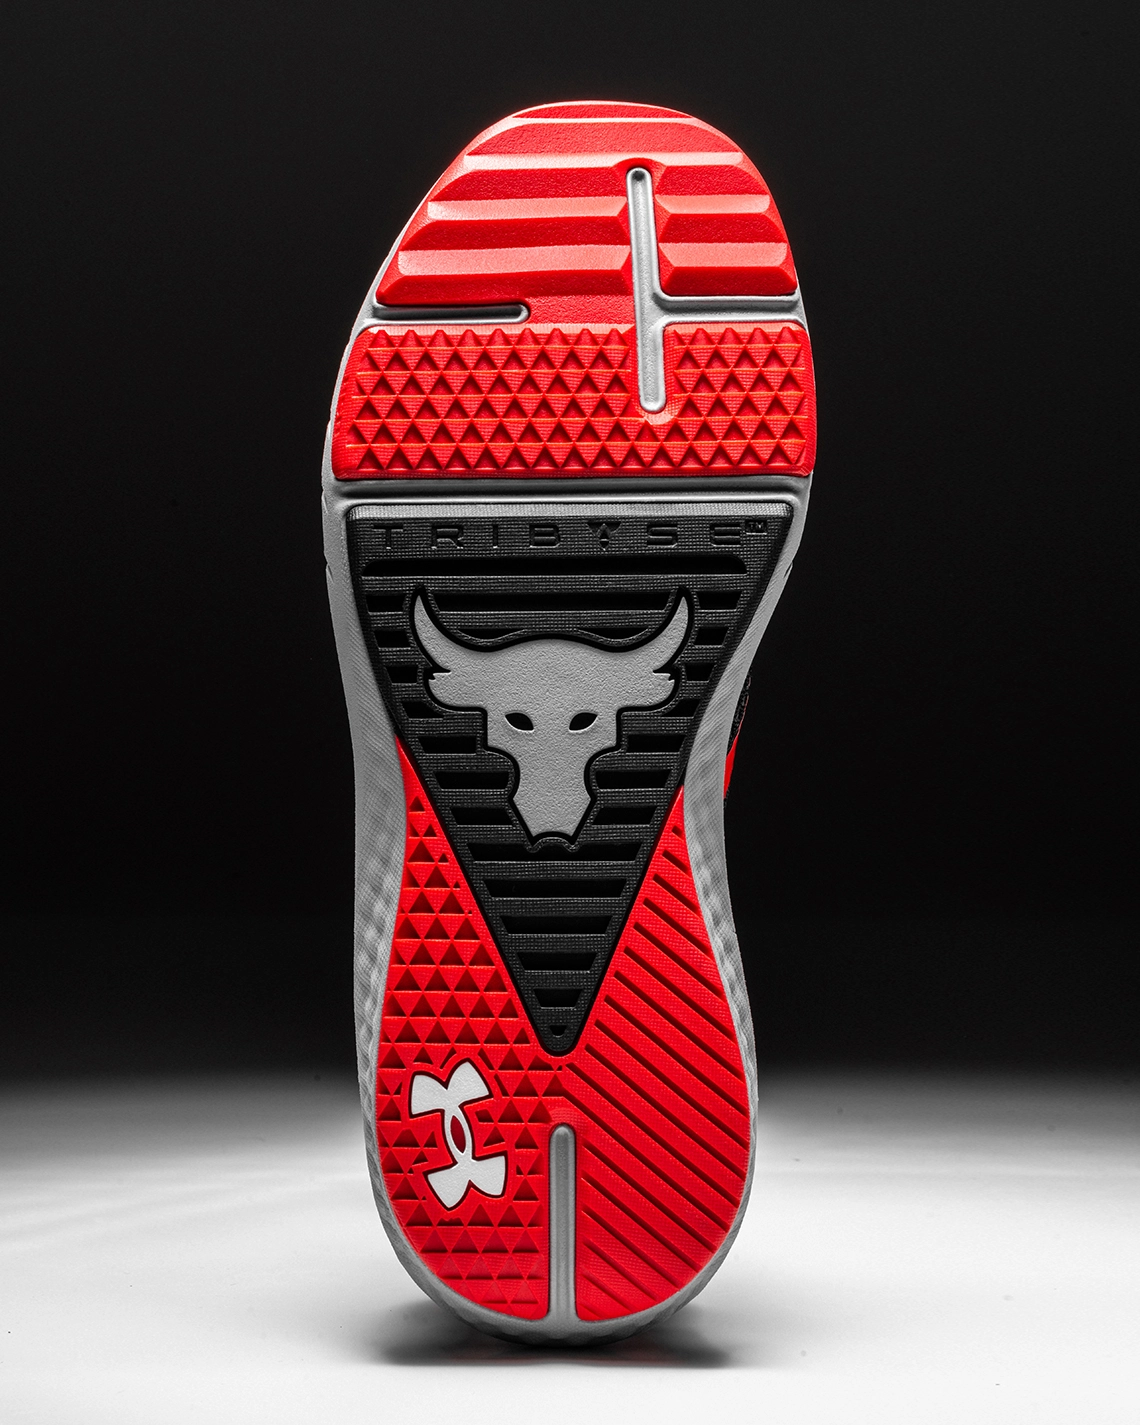 Under Armour Collaborates with The Rock and UFC for a Co-Branded Shoe